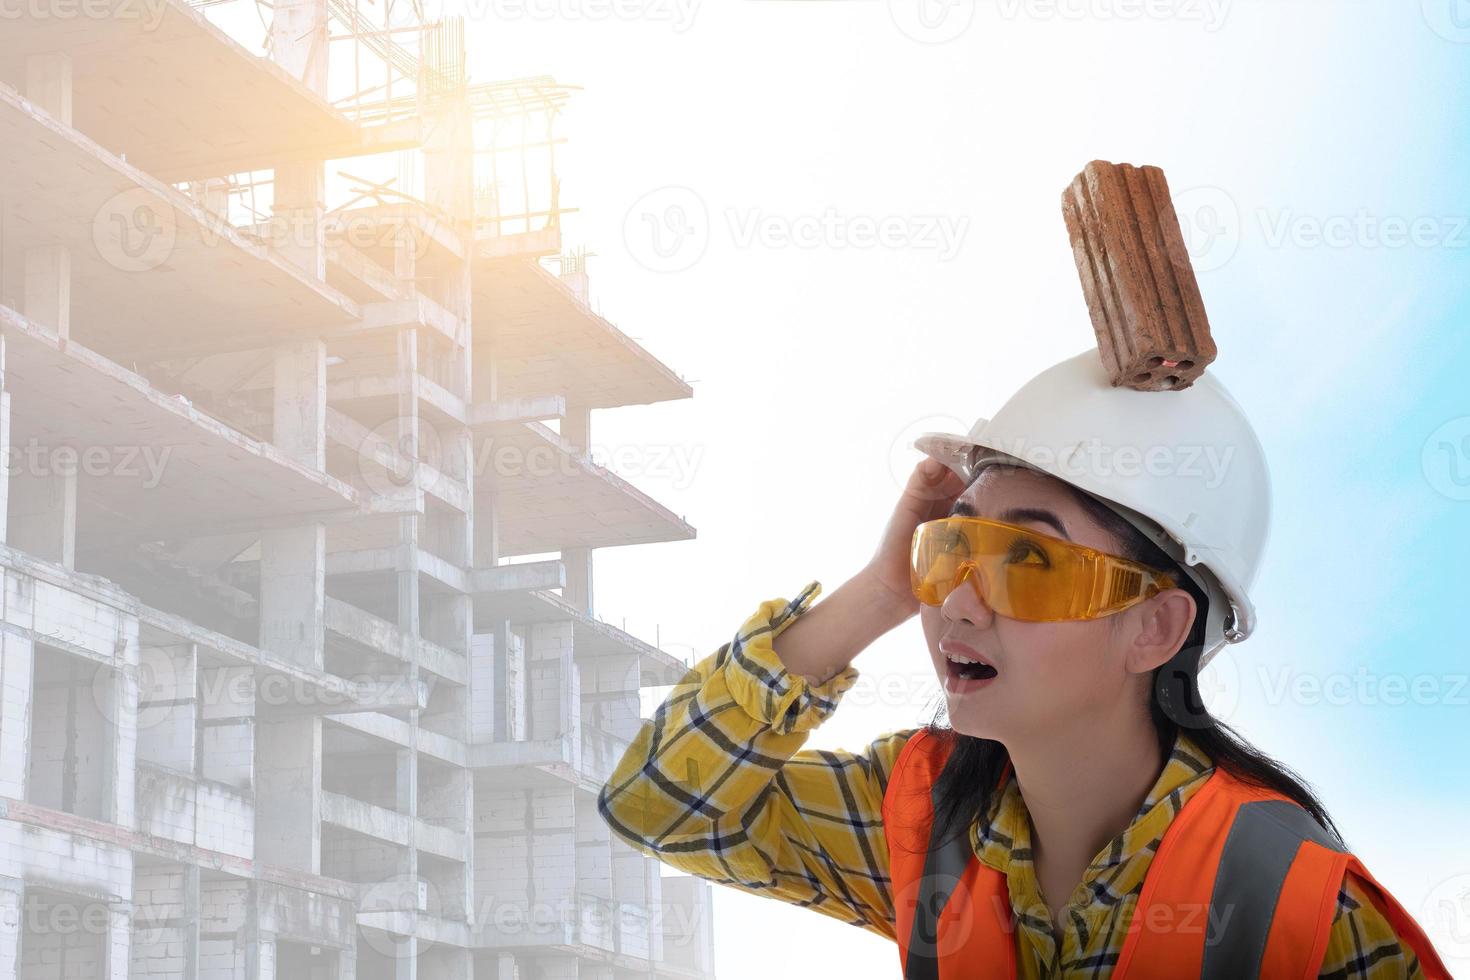 The stick block brick fell on the Asia engineer young woman head on the helmet worker at white background, Area construction safety first concept photo